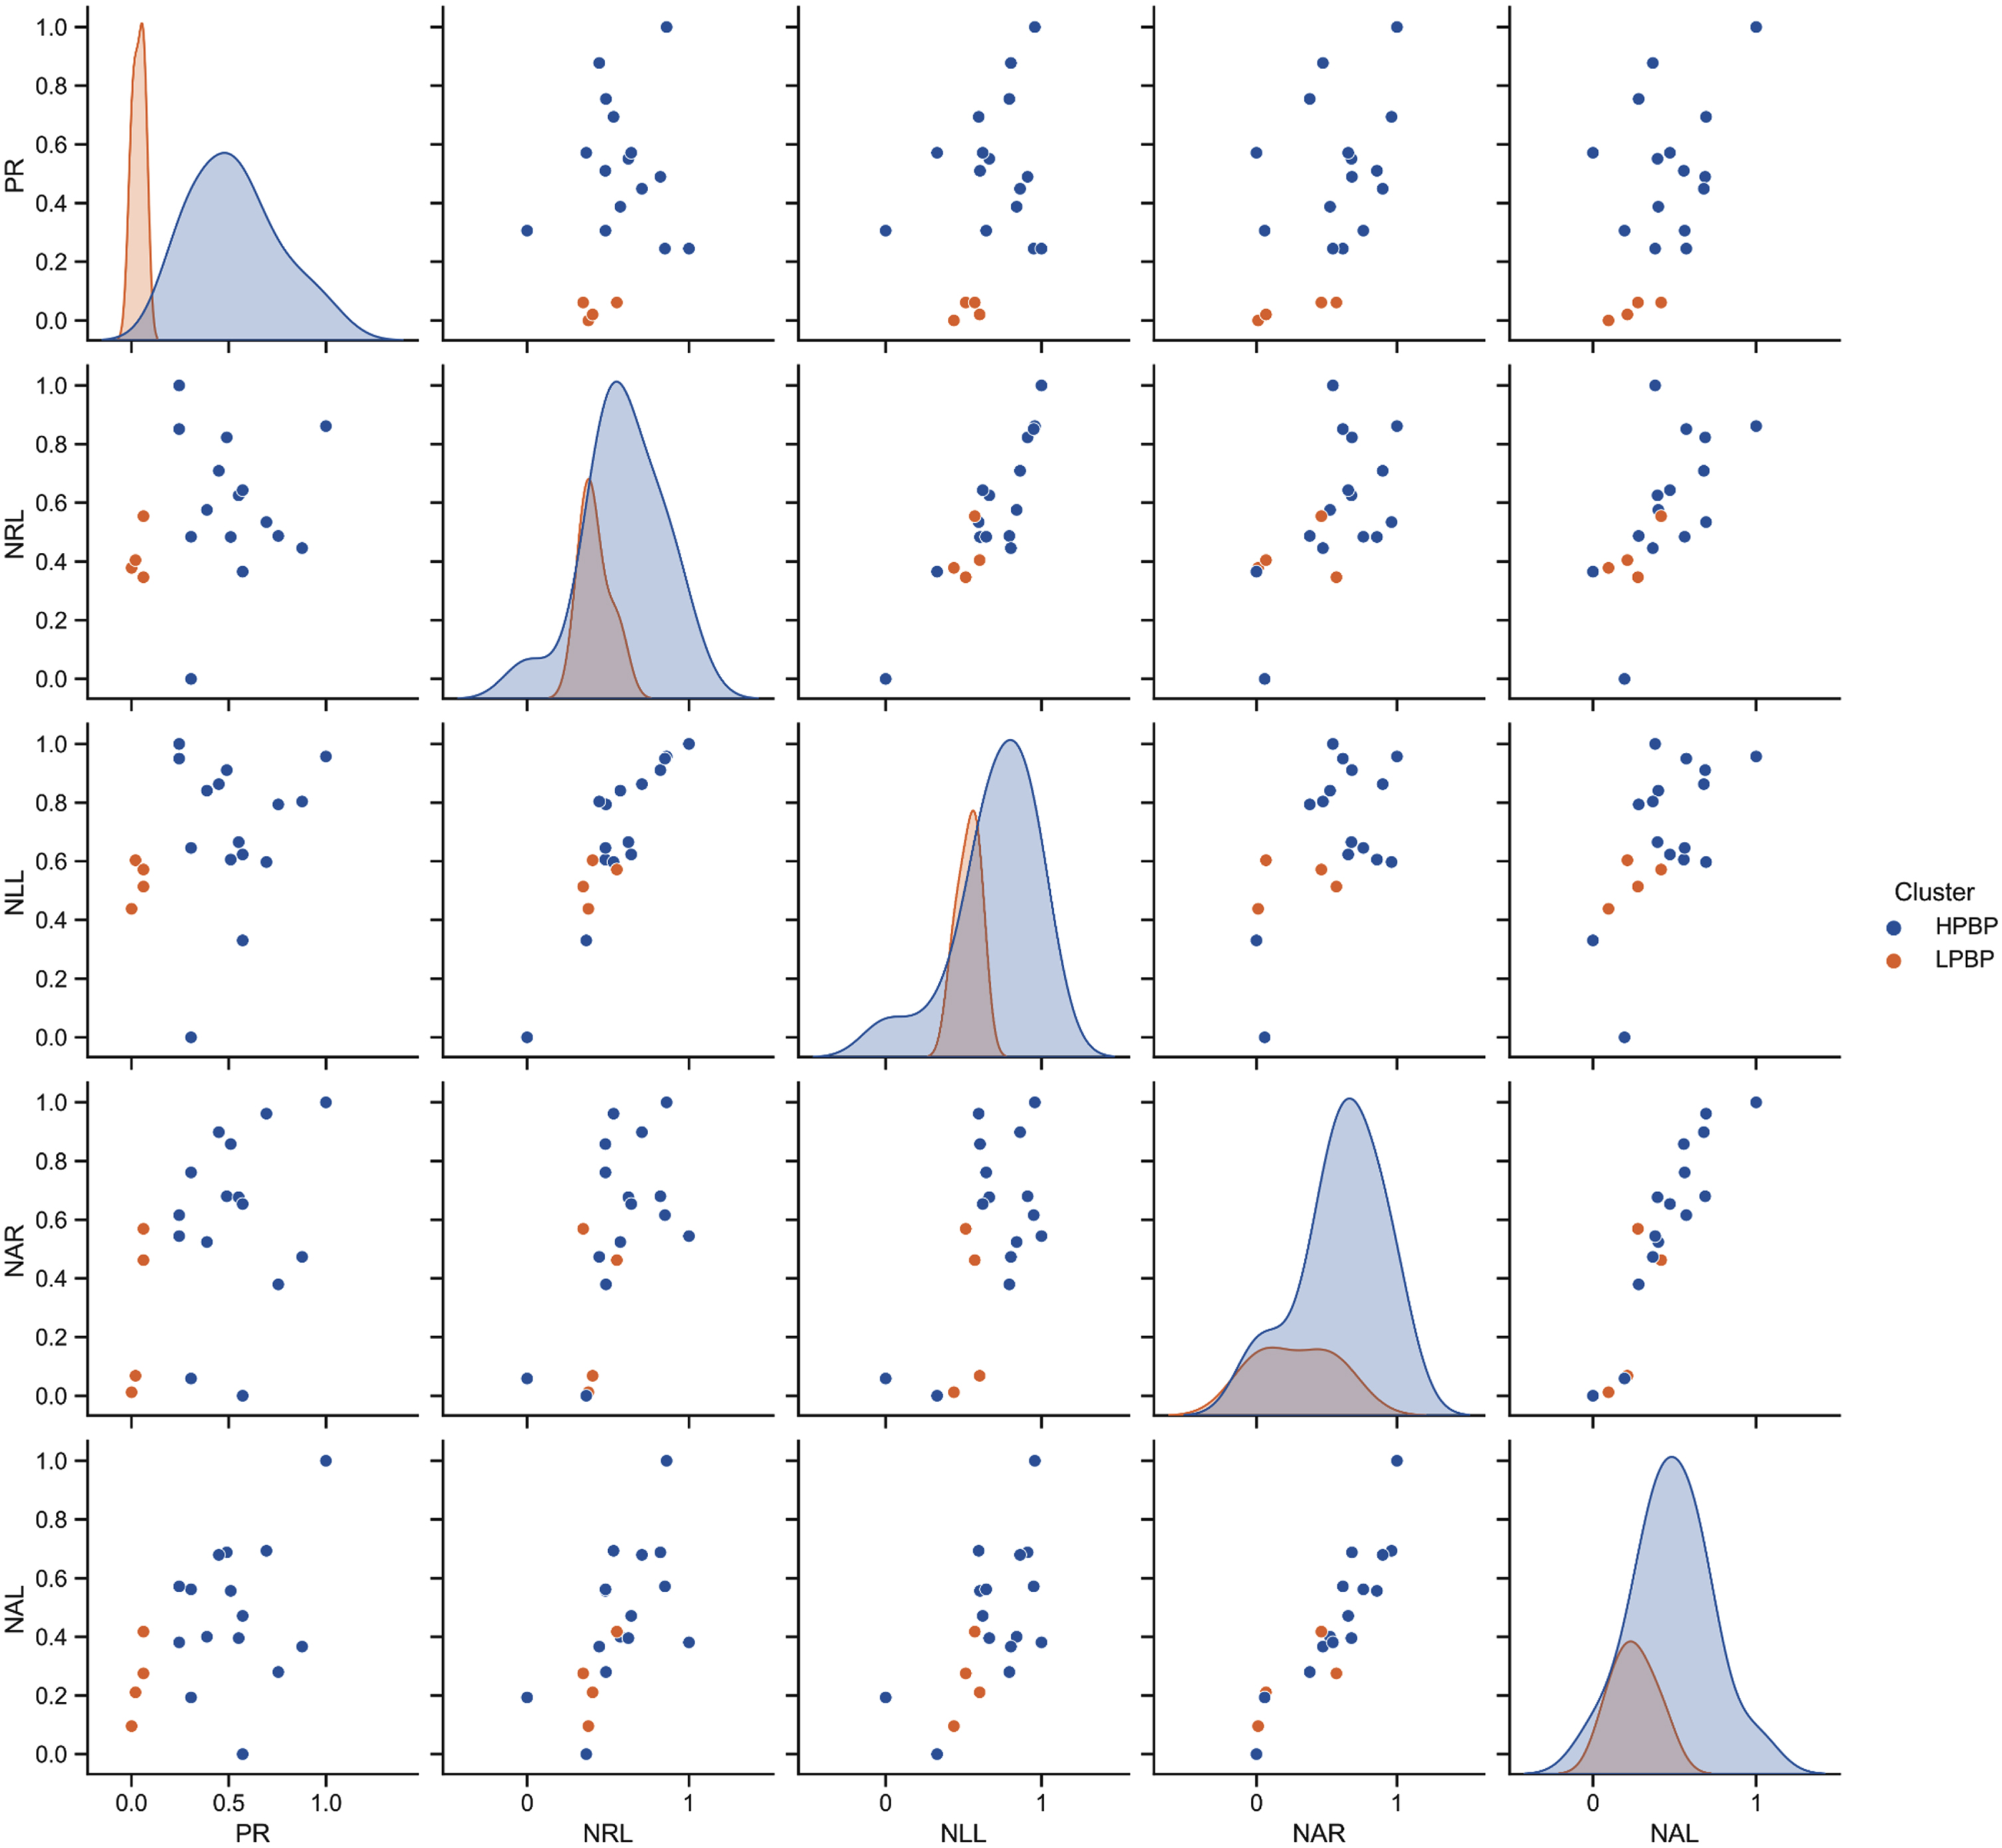 Scatterplots and kernel densities of features.